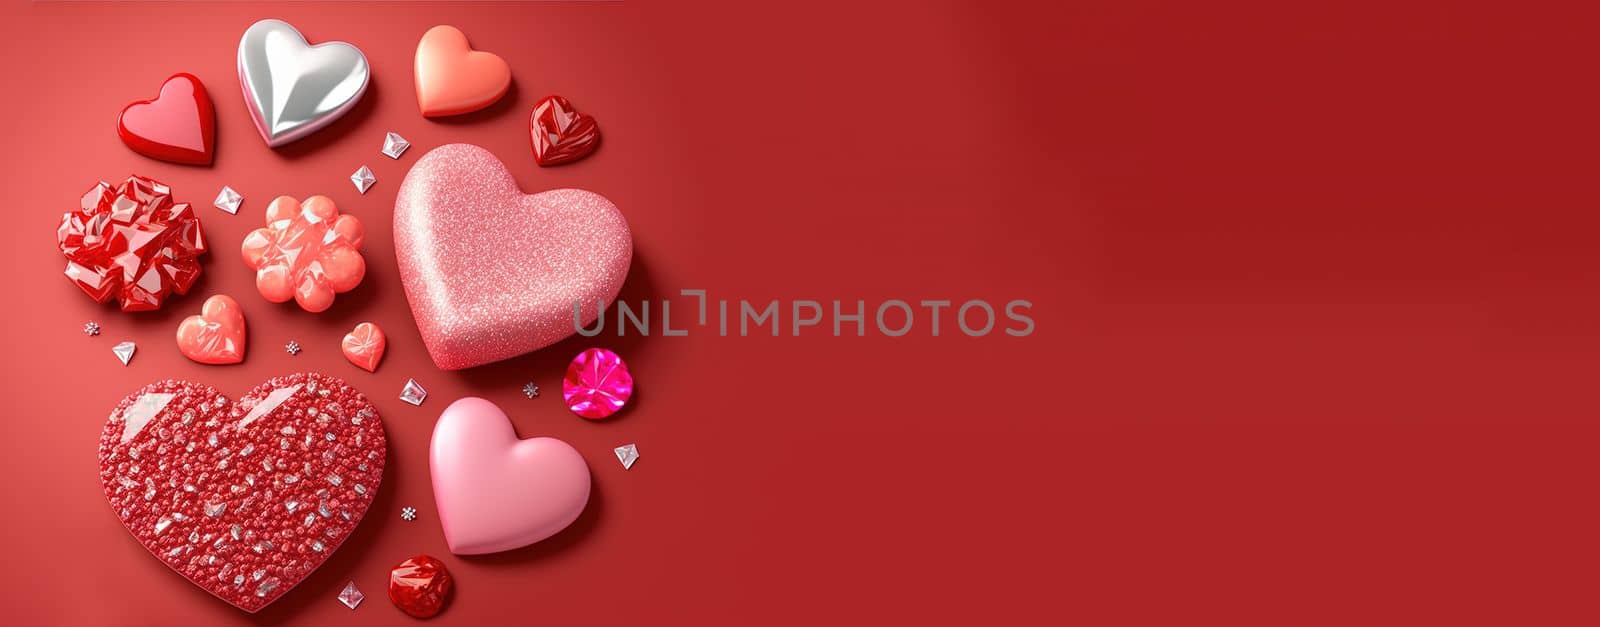 Valentine's Day Banner Background. Sparkling 3D Heart Shape with Diamond and Crystal Illustration by templator